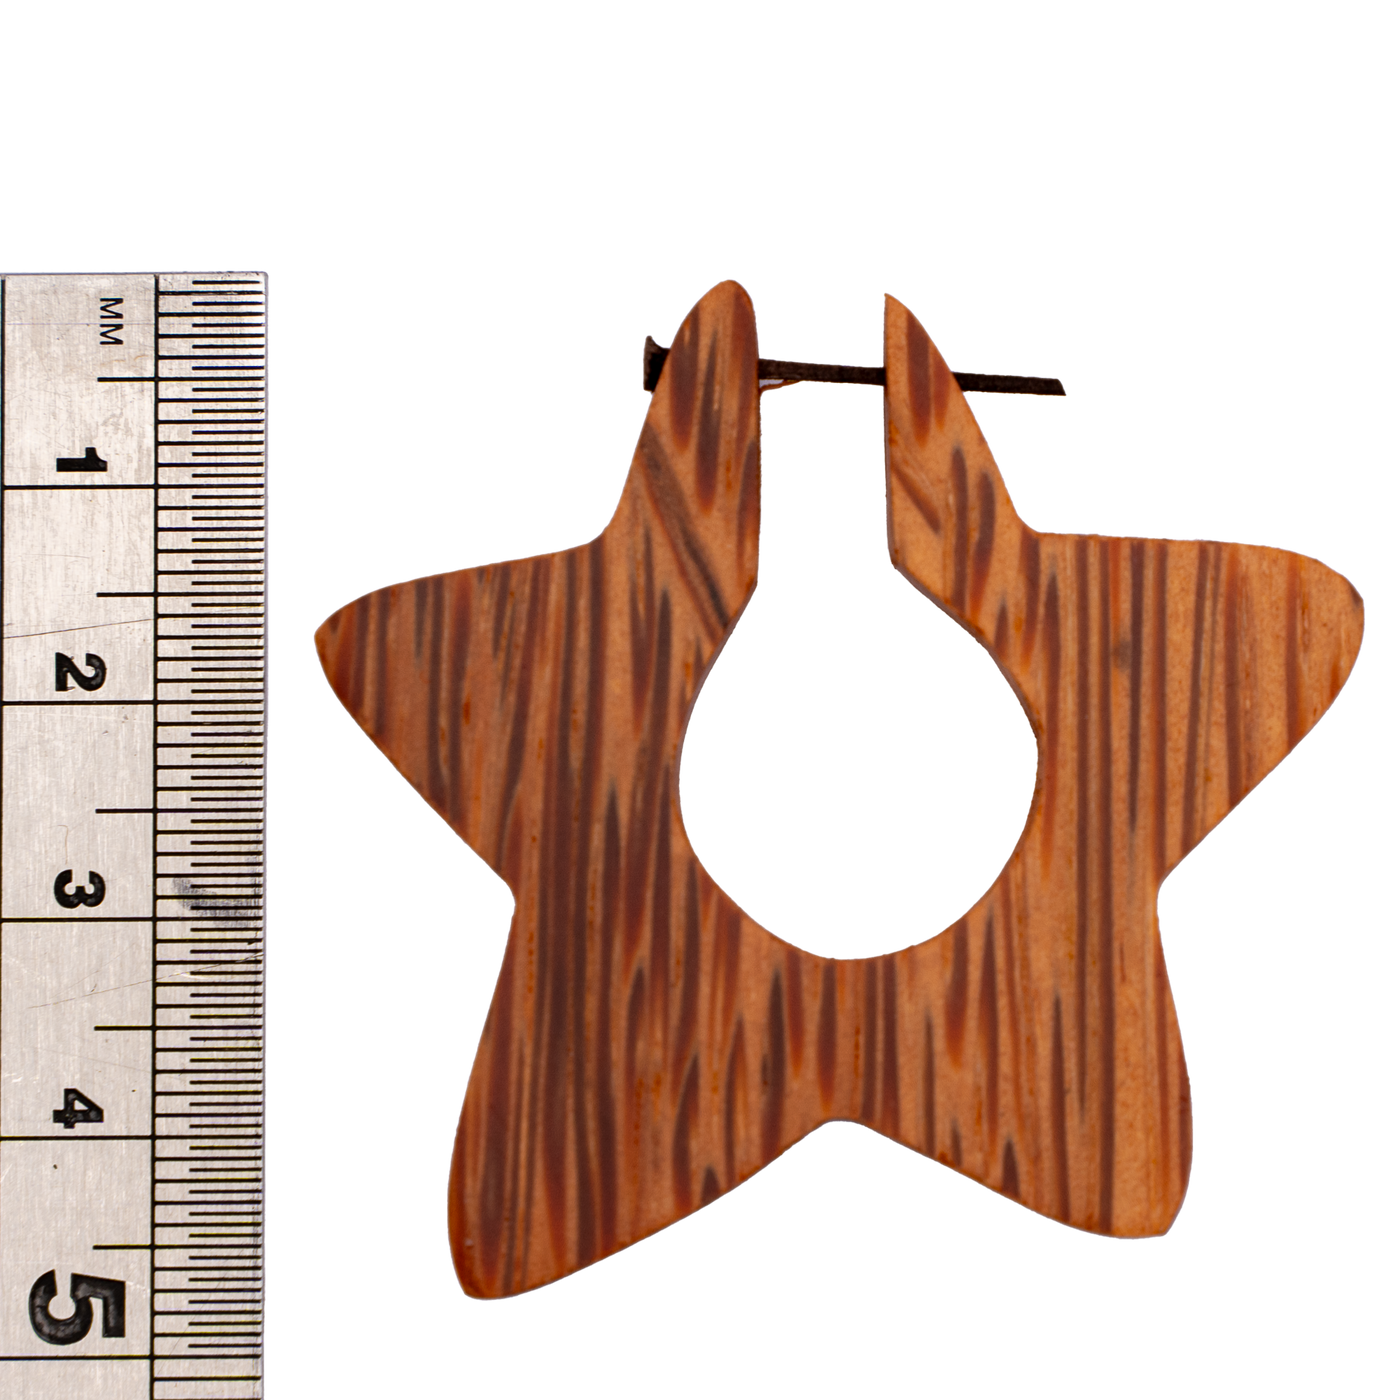 Star Shaped coconut earrings with a stick post to secure in place, approximately 5cm from top to bottom